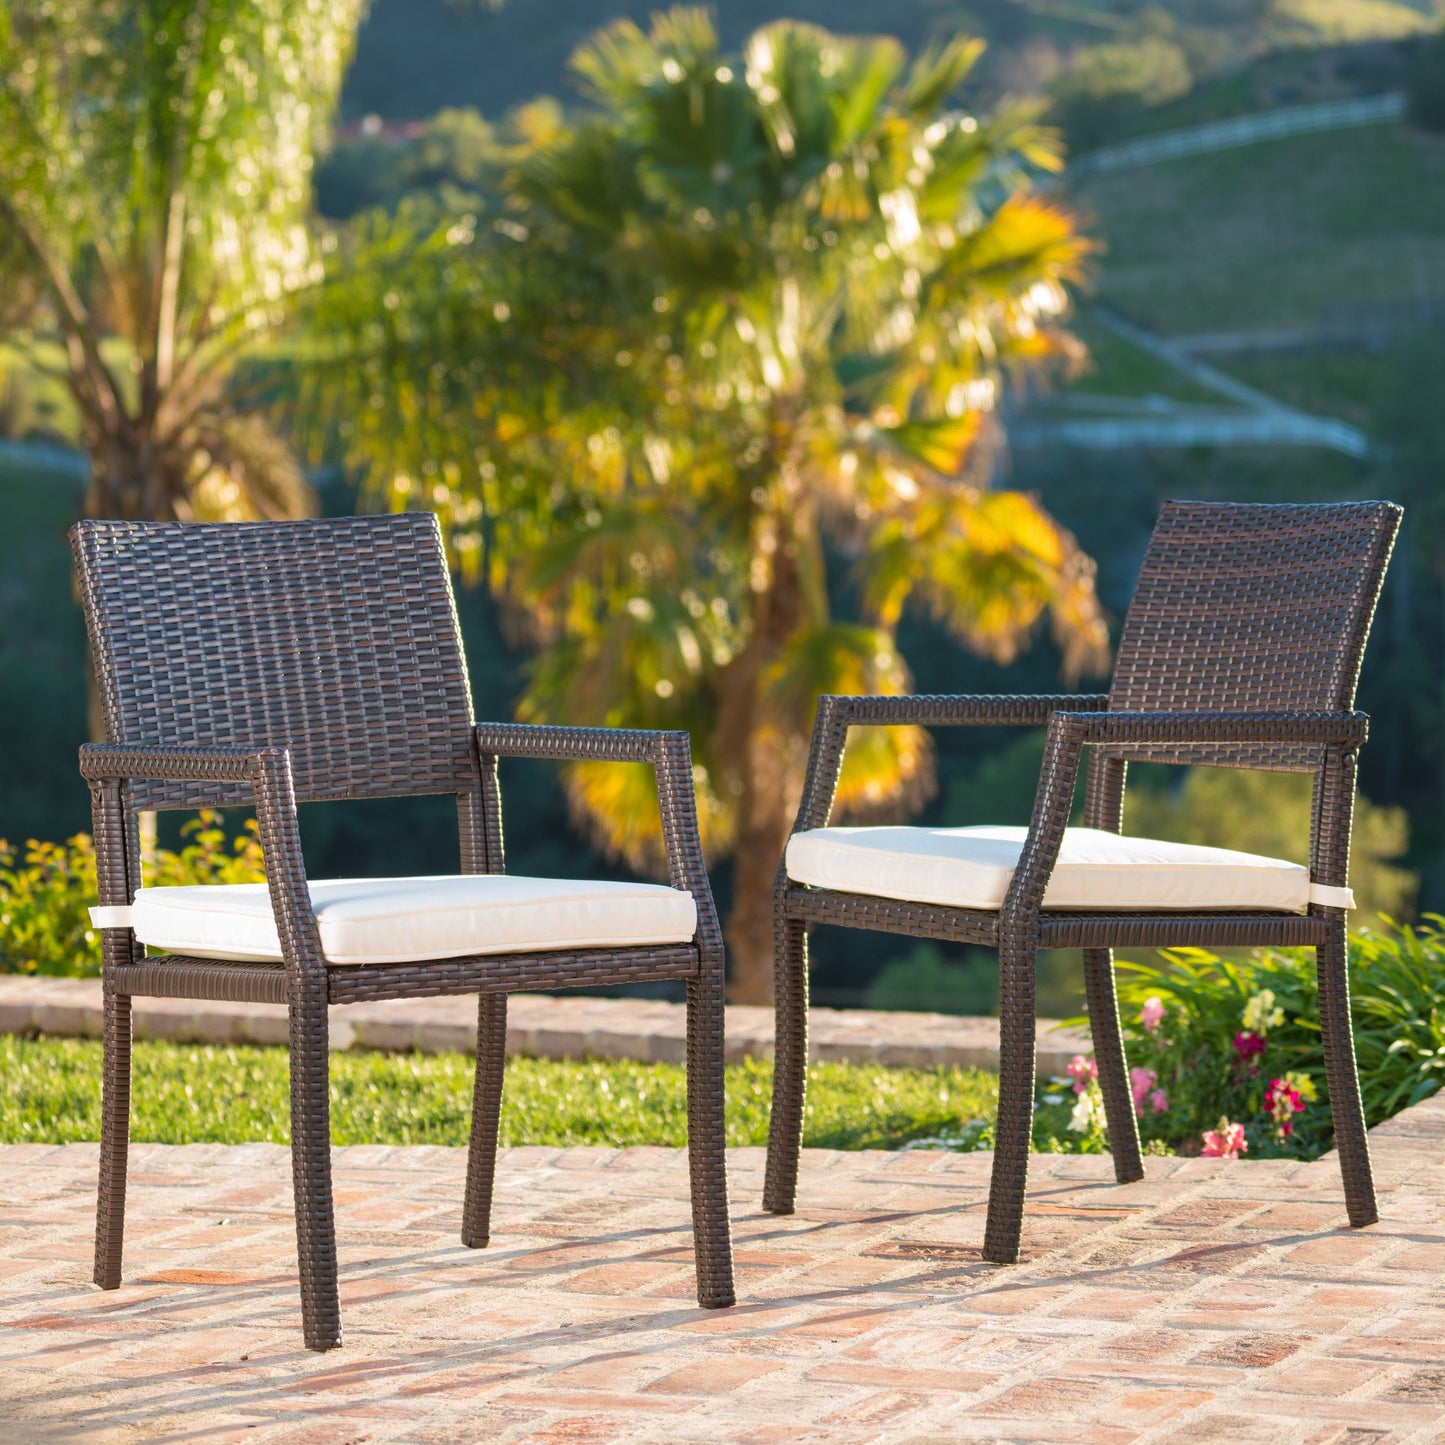 Edene Outdoor Wicker Dining Chairs Water Resistant Cushions (Set of 2)